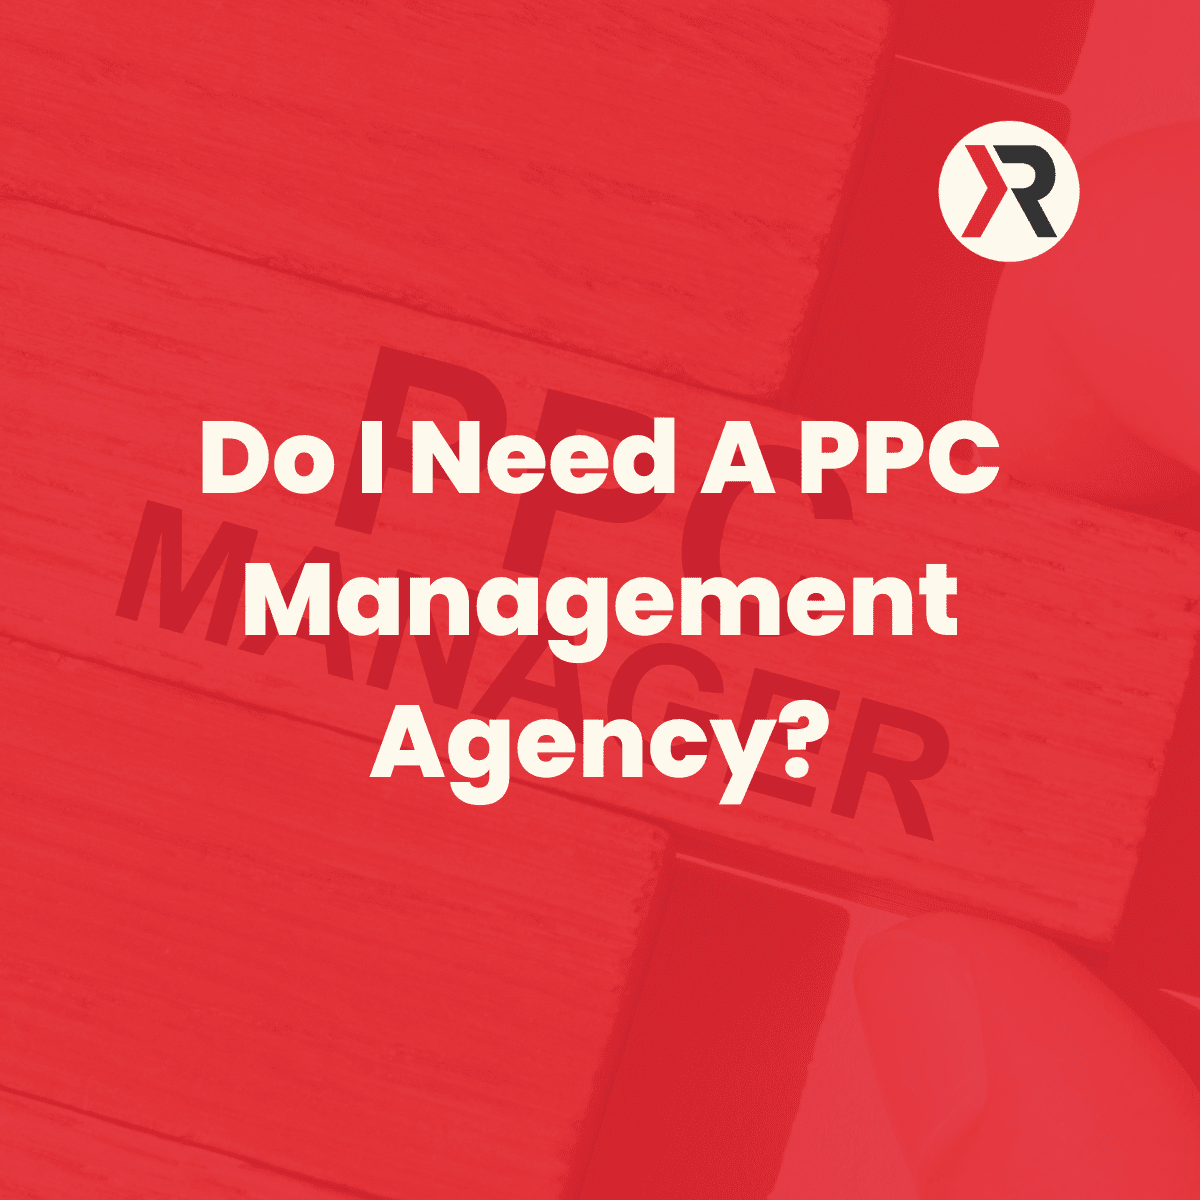 Do I Need A PPC Management Agency